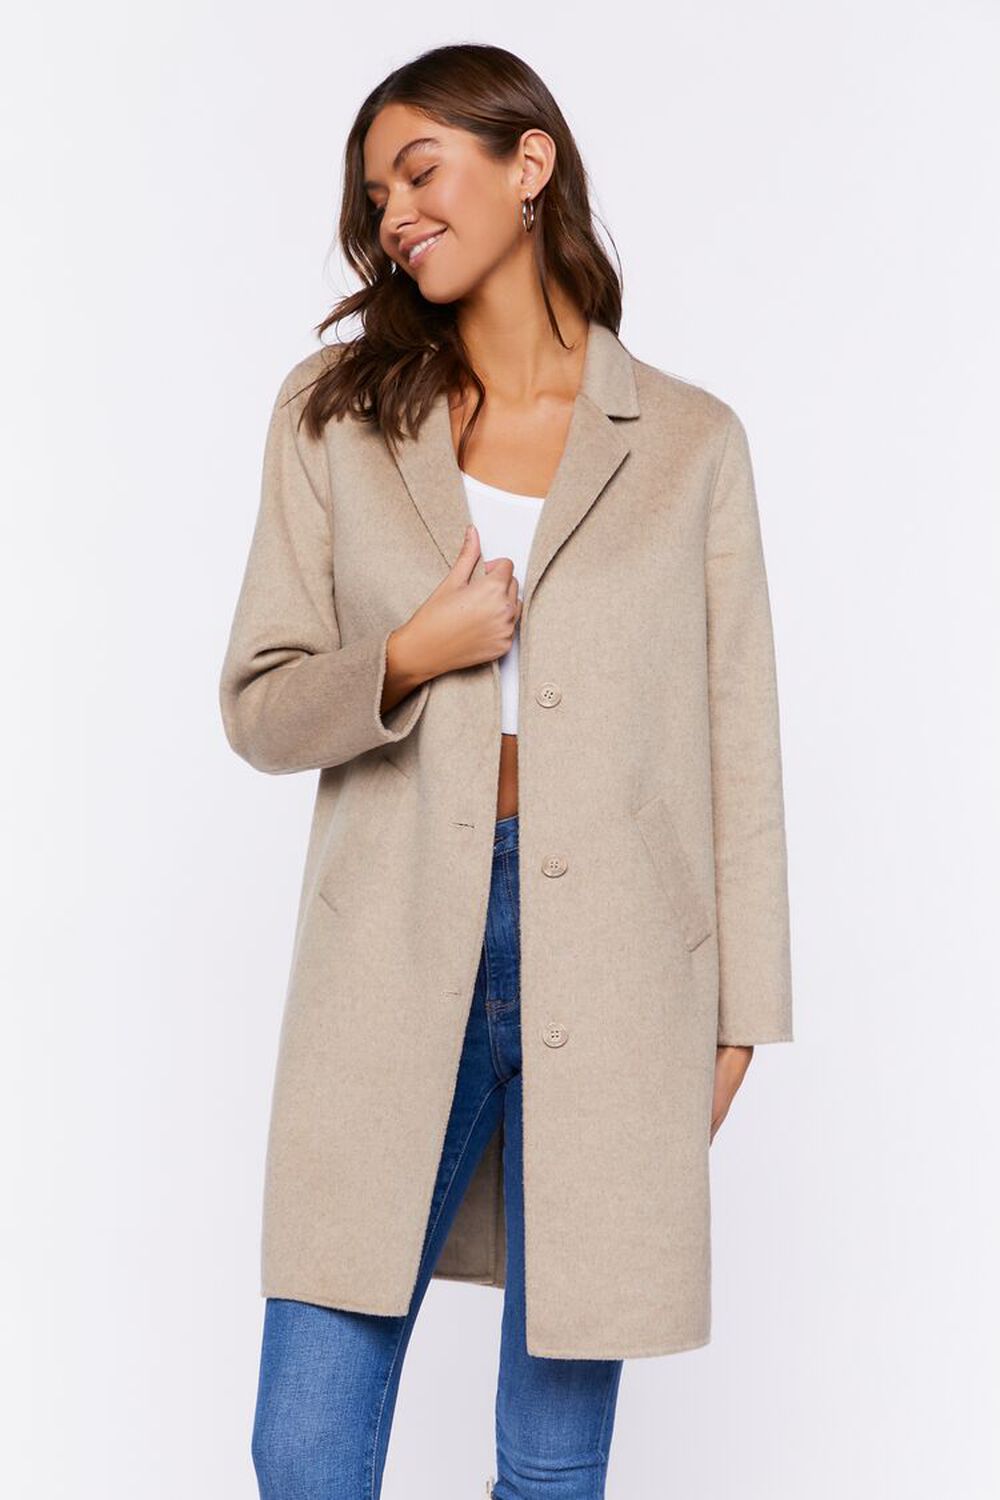 OATMEAL Brushed Longline Button-Front Coat, image 1